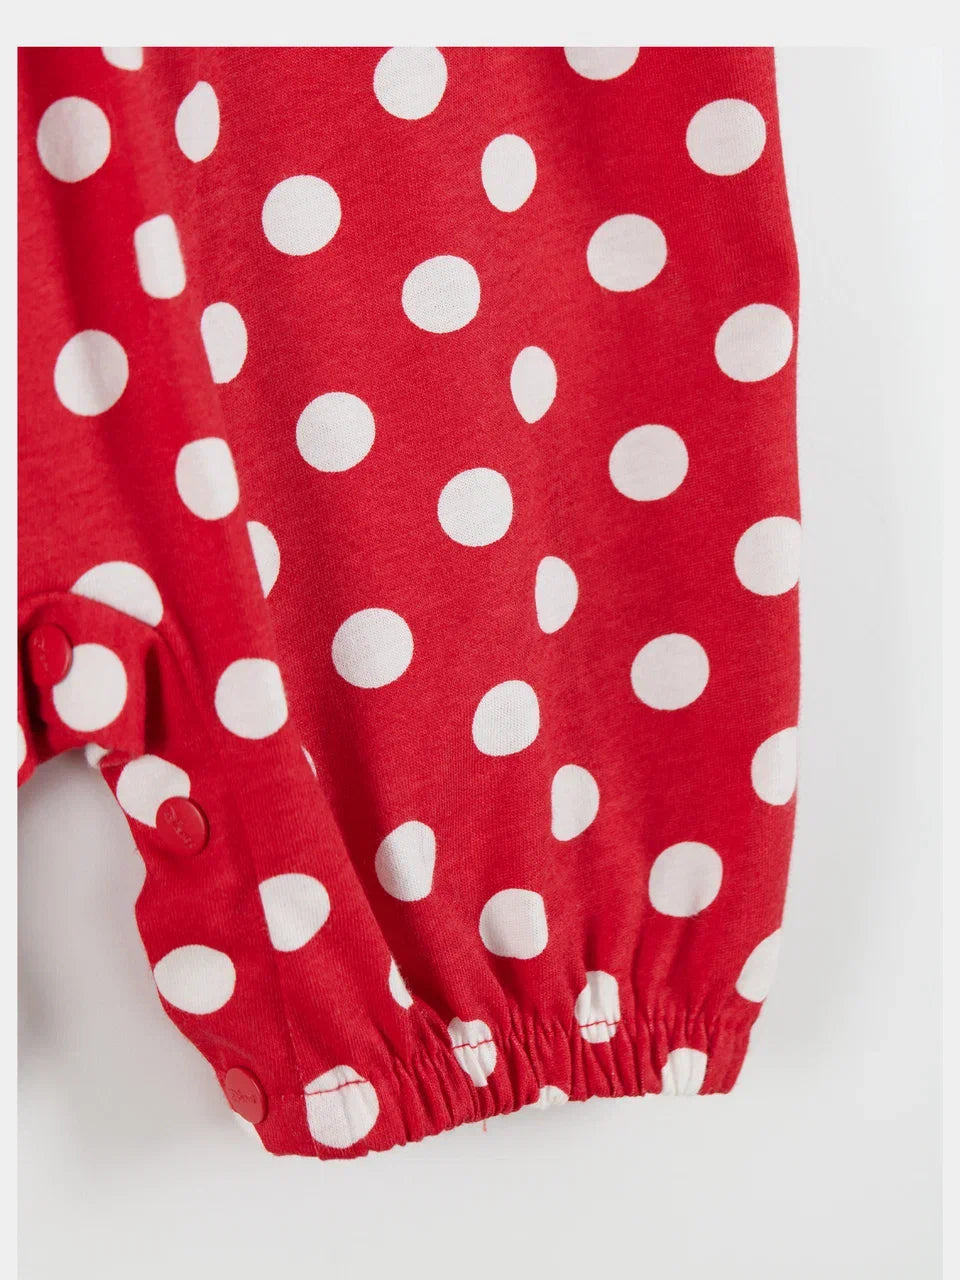 Disney Baby Minnie Mouse Romper